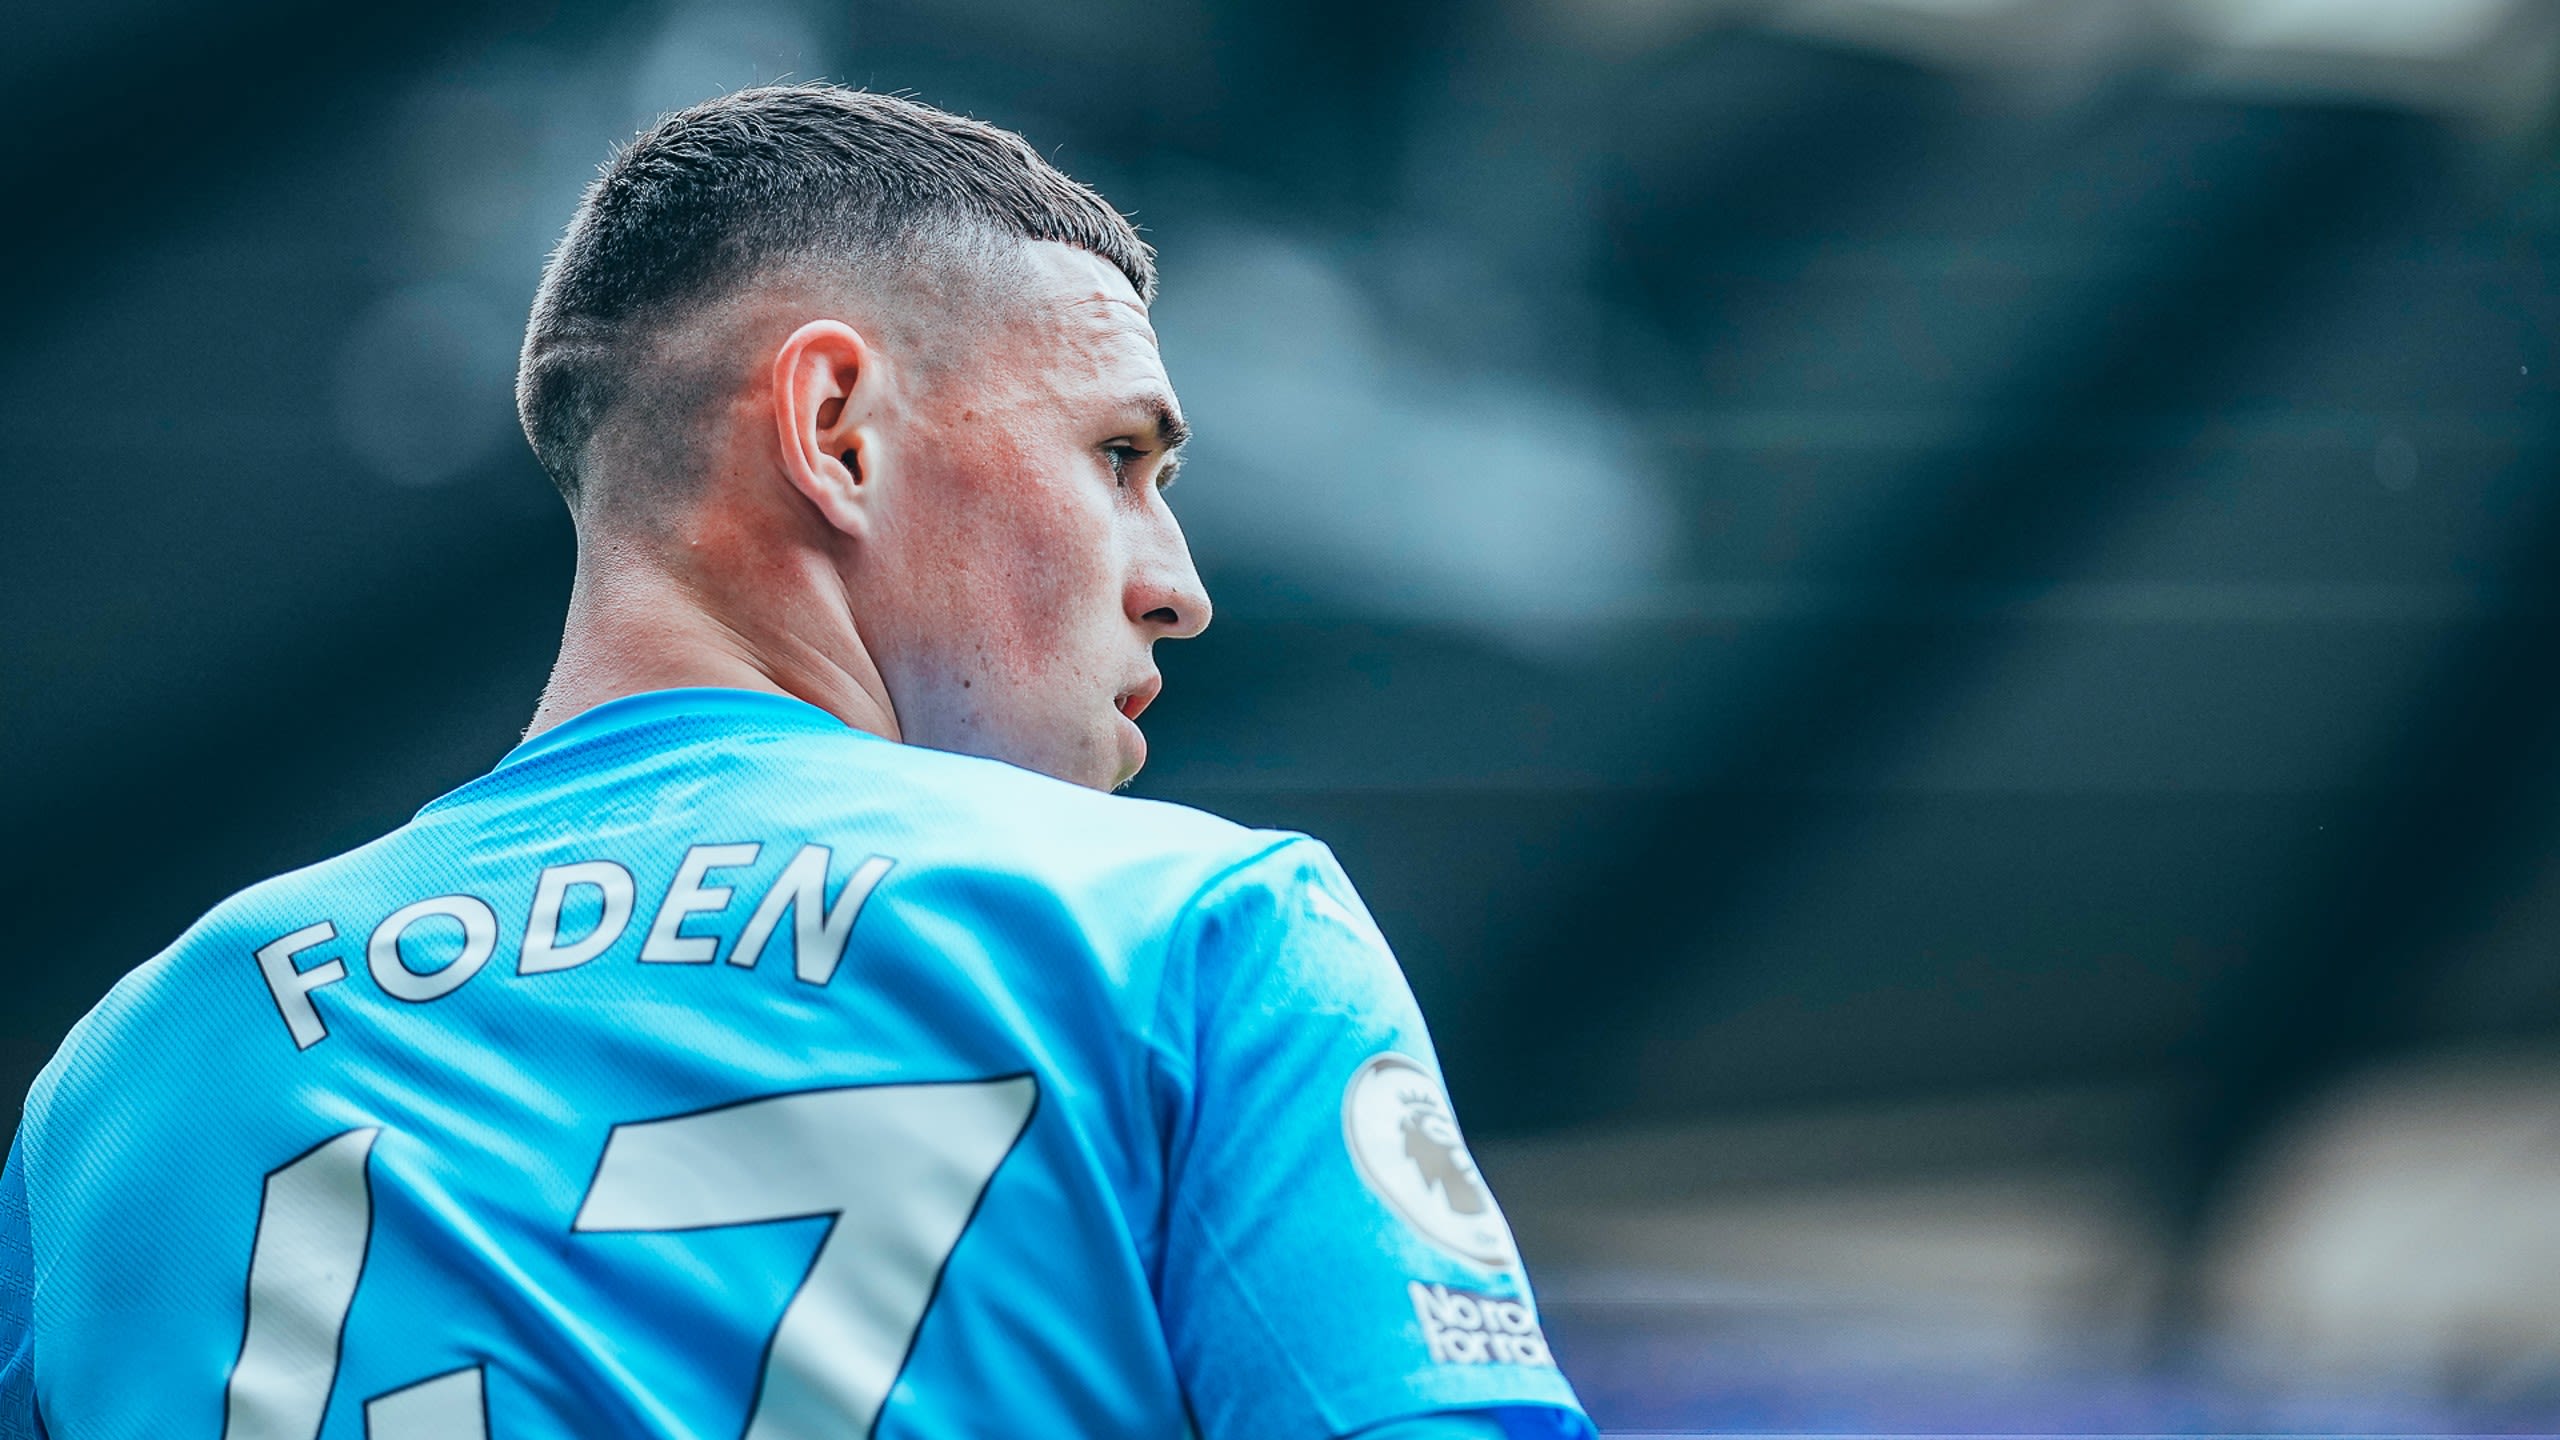 http://www.mancity.com/features/phil-foden-one-of-our-own/assets/VNxkiCqskG/phil-foden-one-of-our-own-2560x1440.jpg